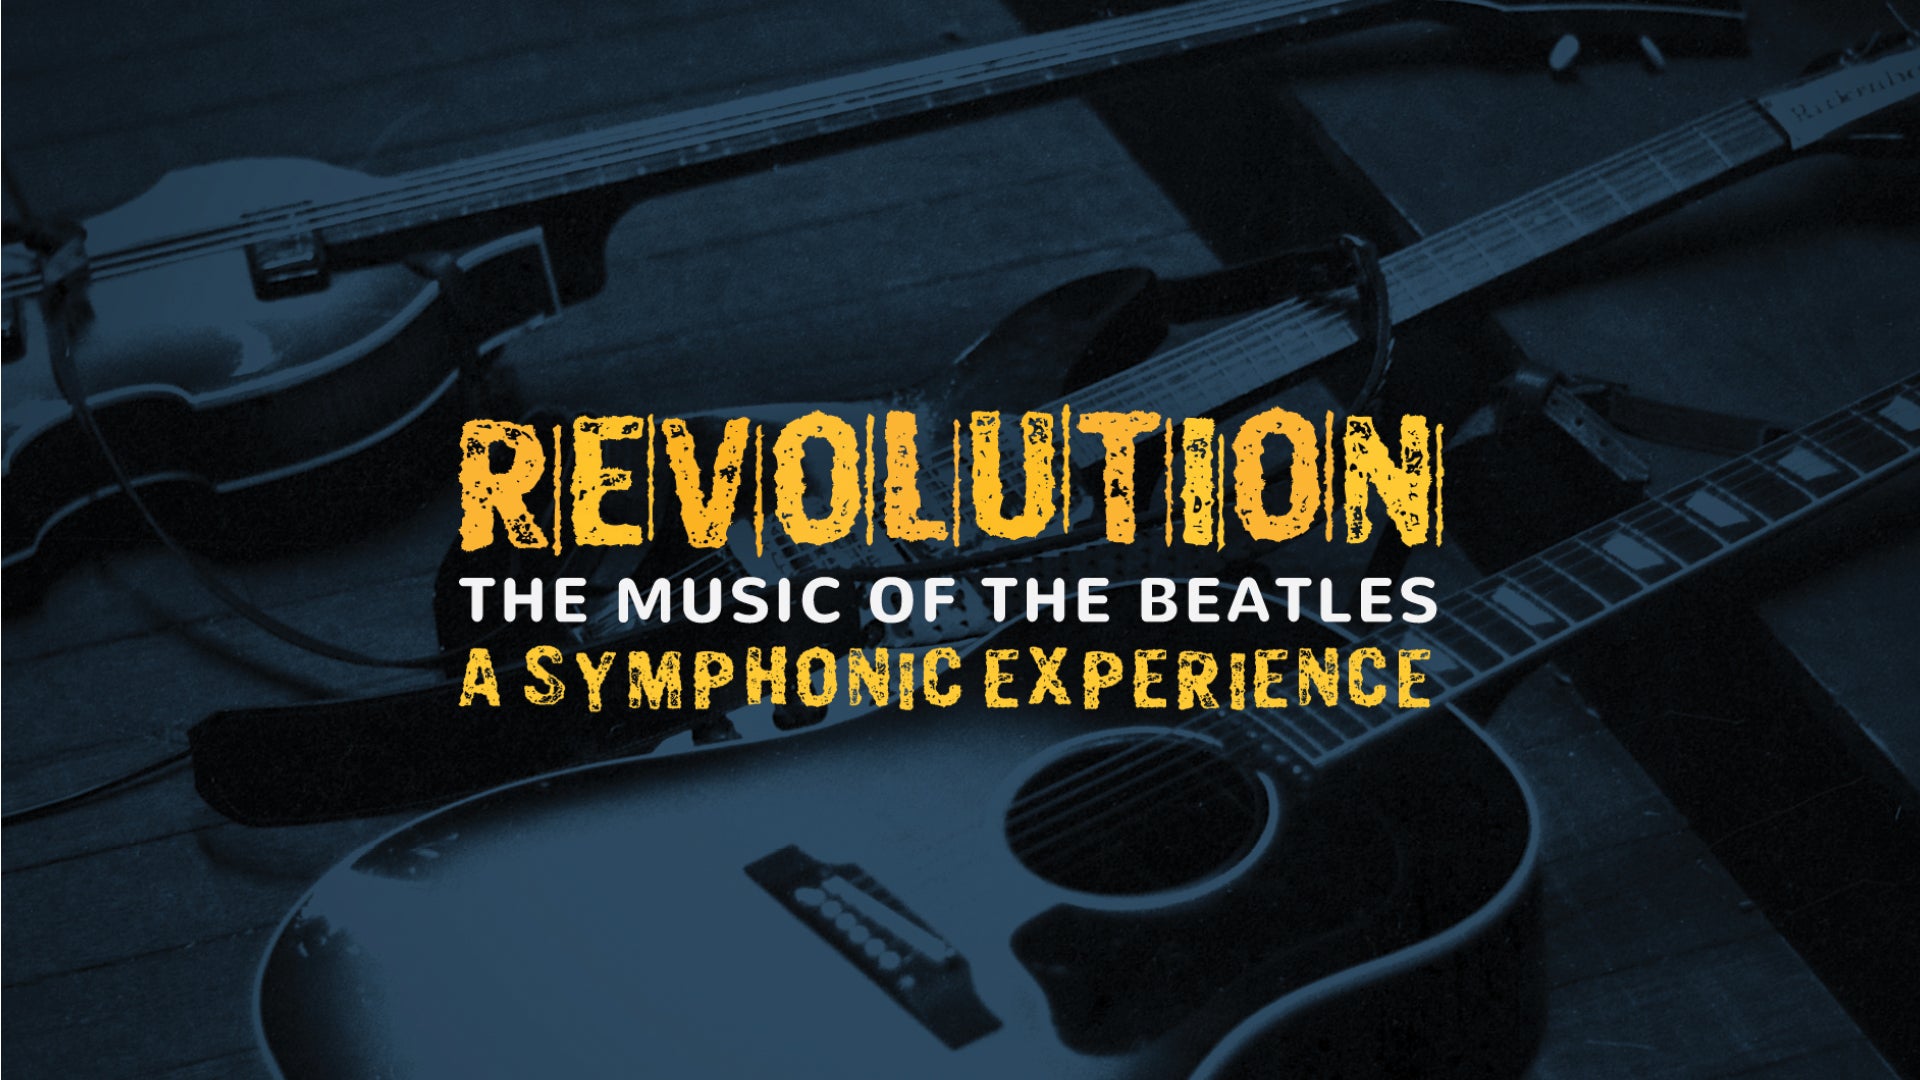 Beatles Revolution: The Music of The Beatles